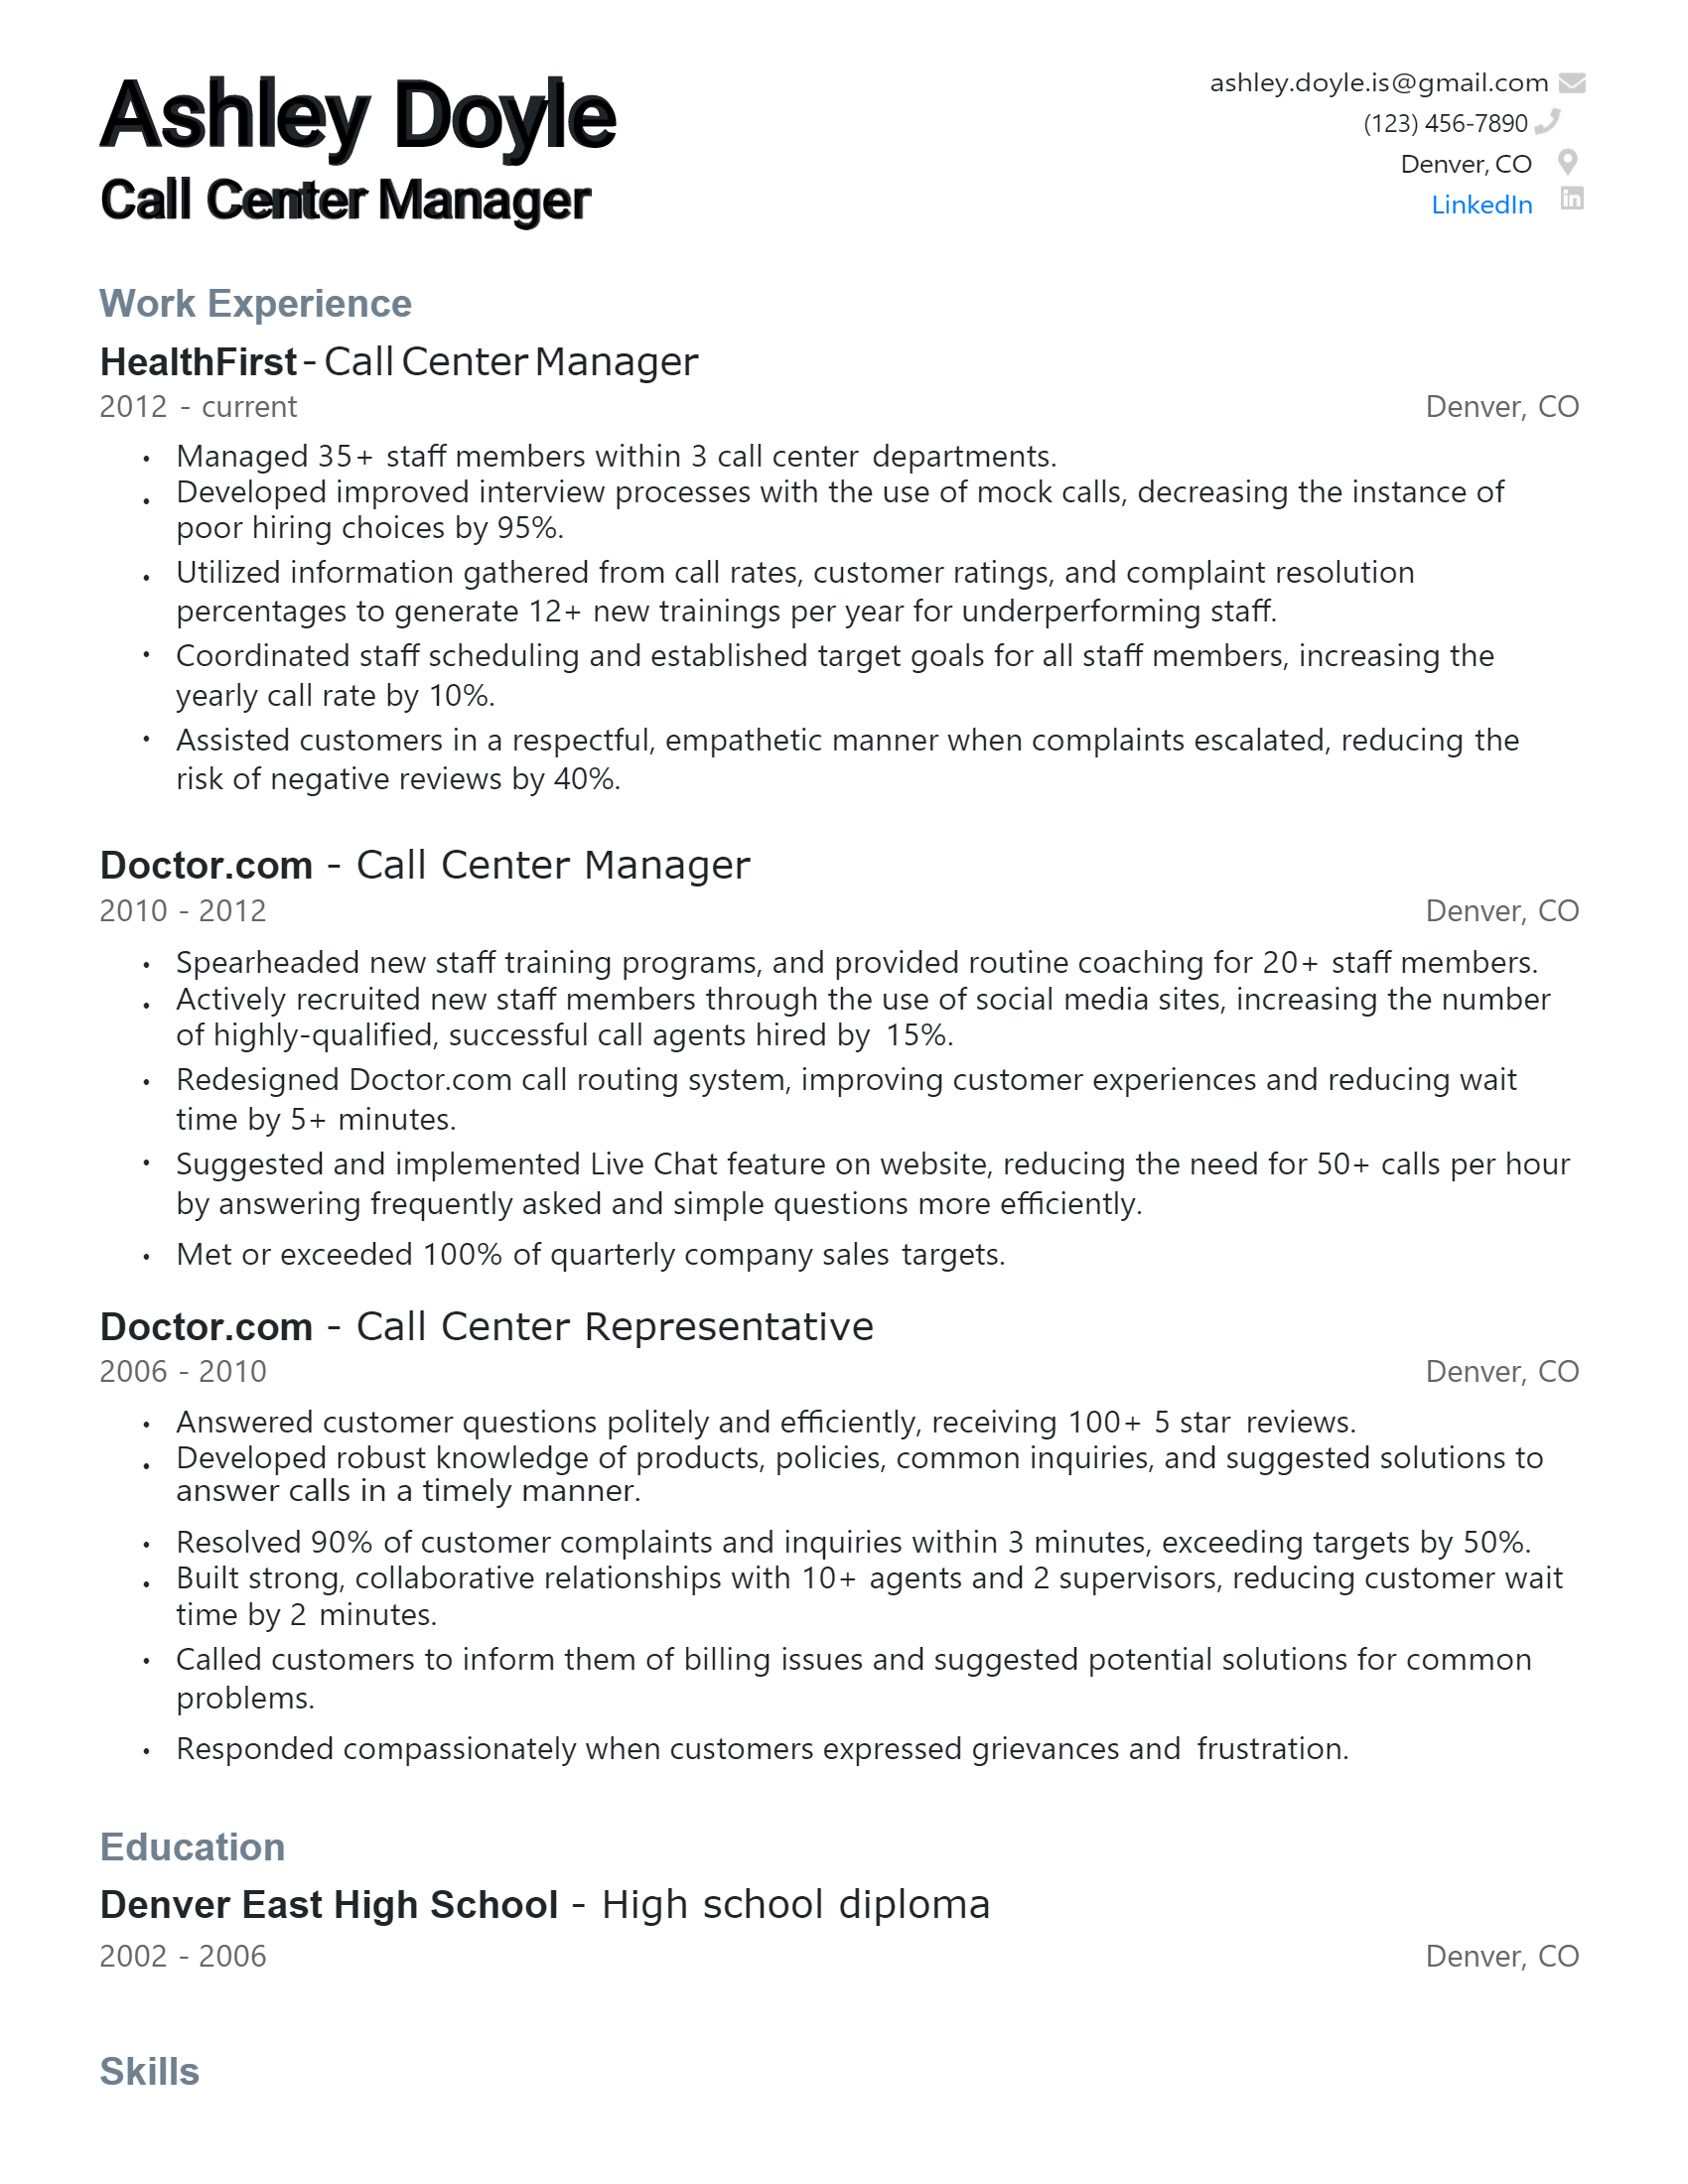 resume examples for call center manager